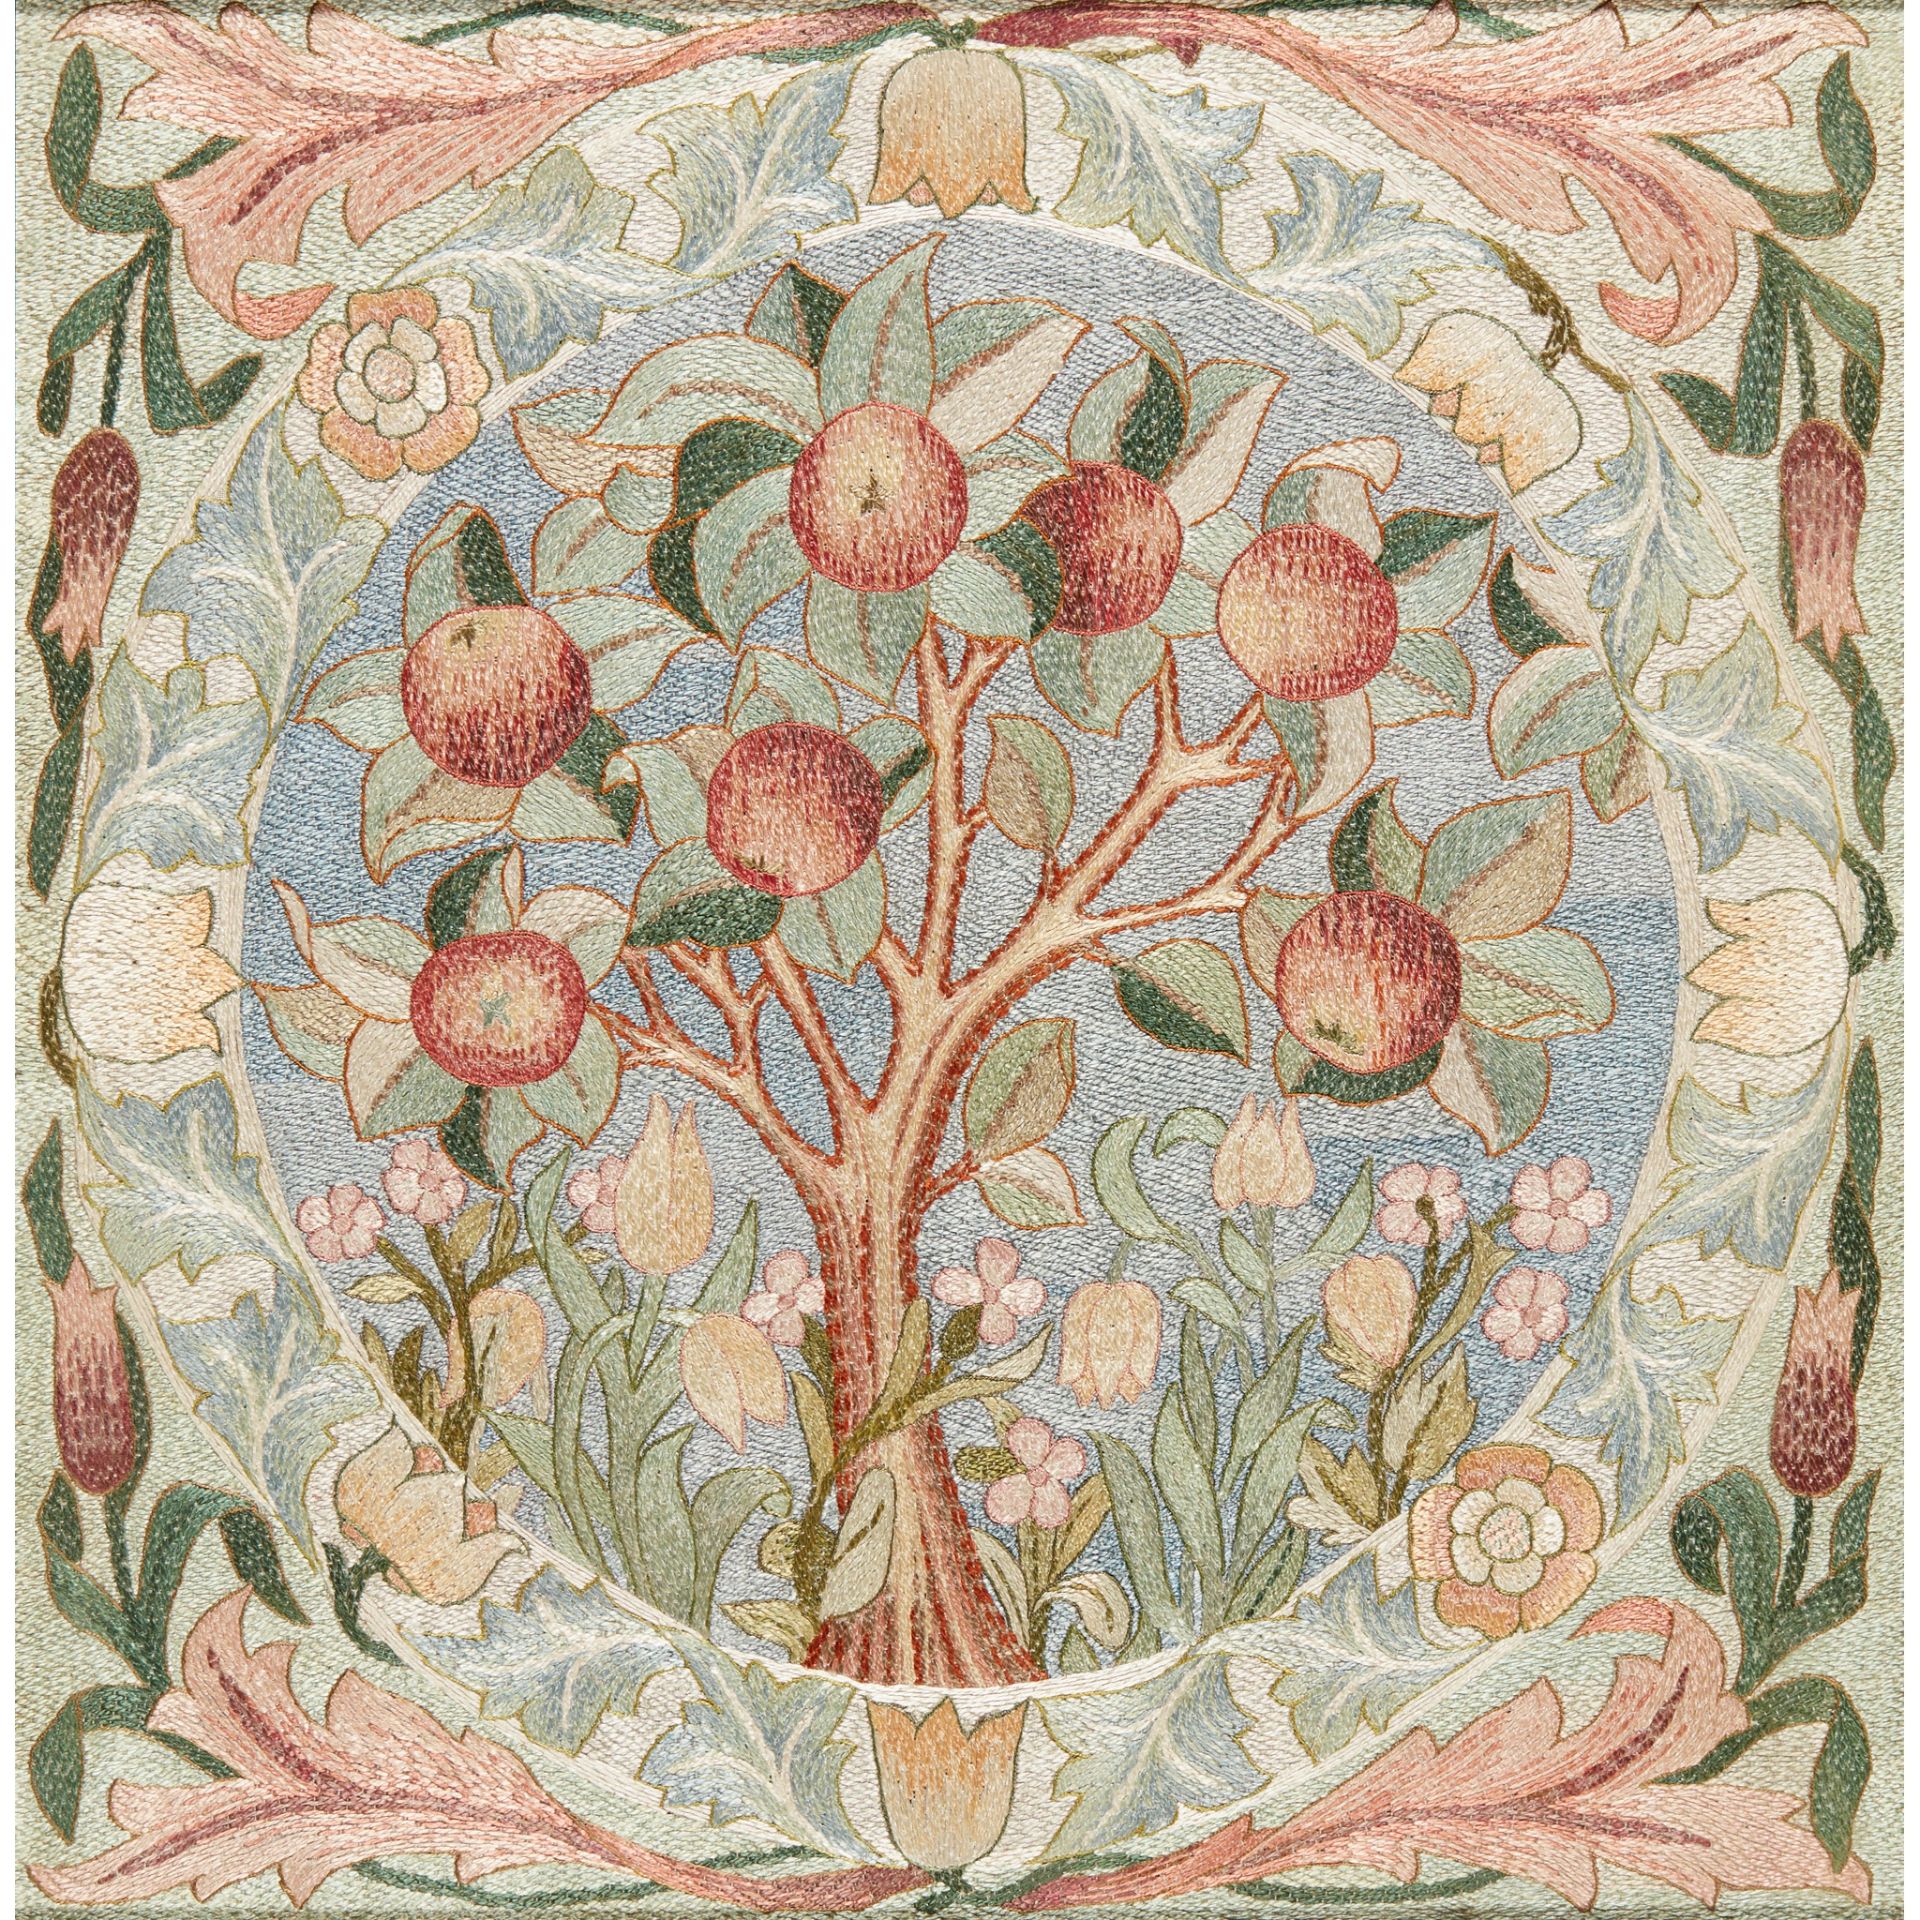 WILLIAM MORRIS (1834-1896) FOR MORRIS & CO. ‘THE APPLE TREE’ EMBROIDERED PANEL, CIRCA 1890